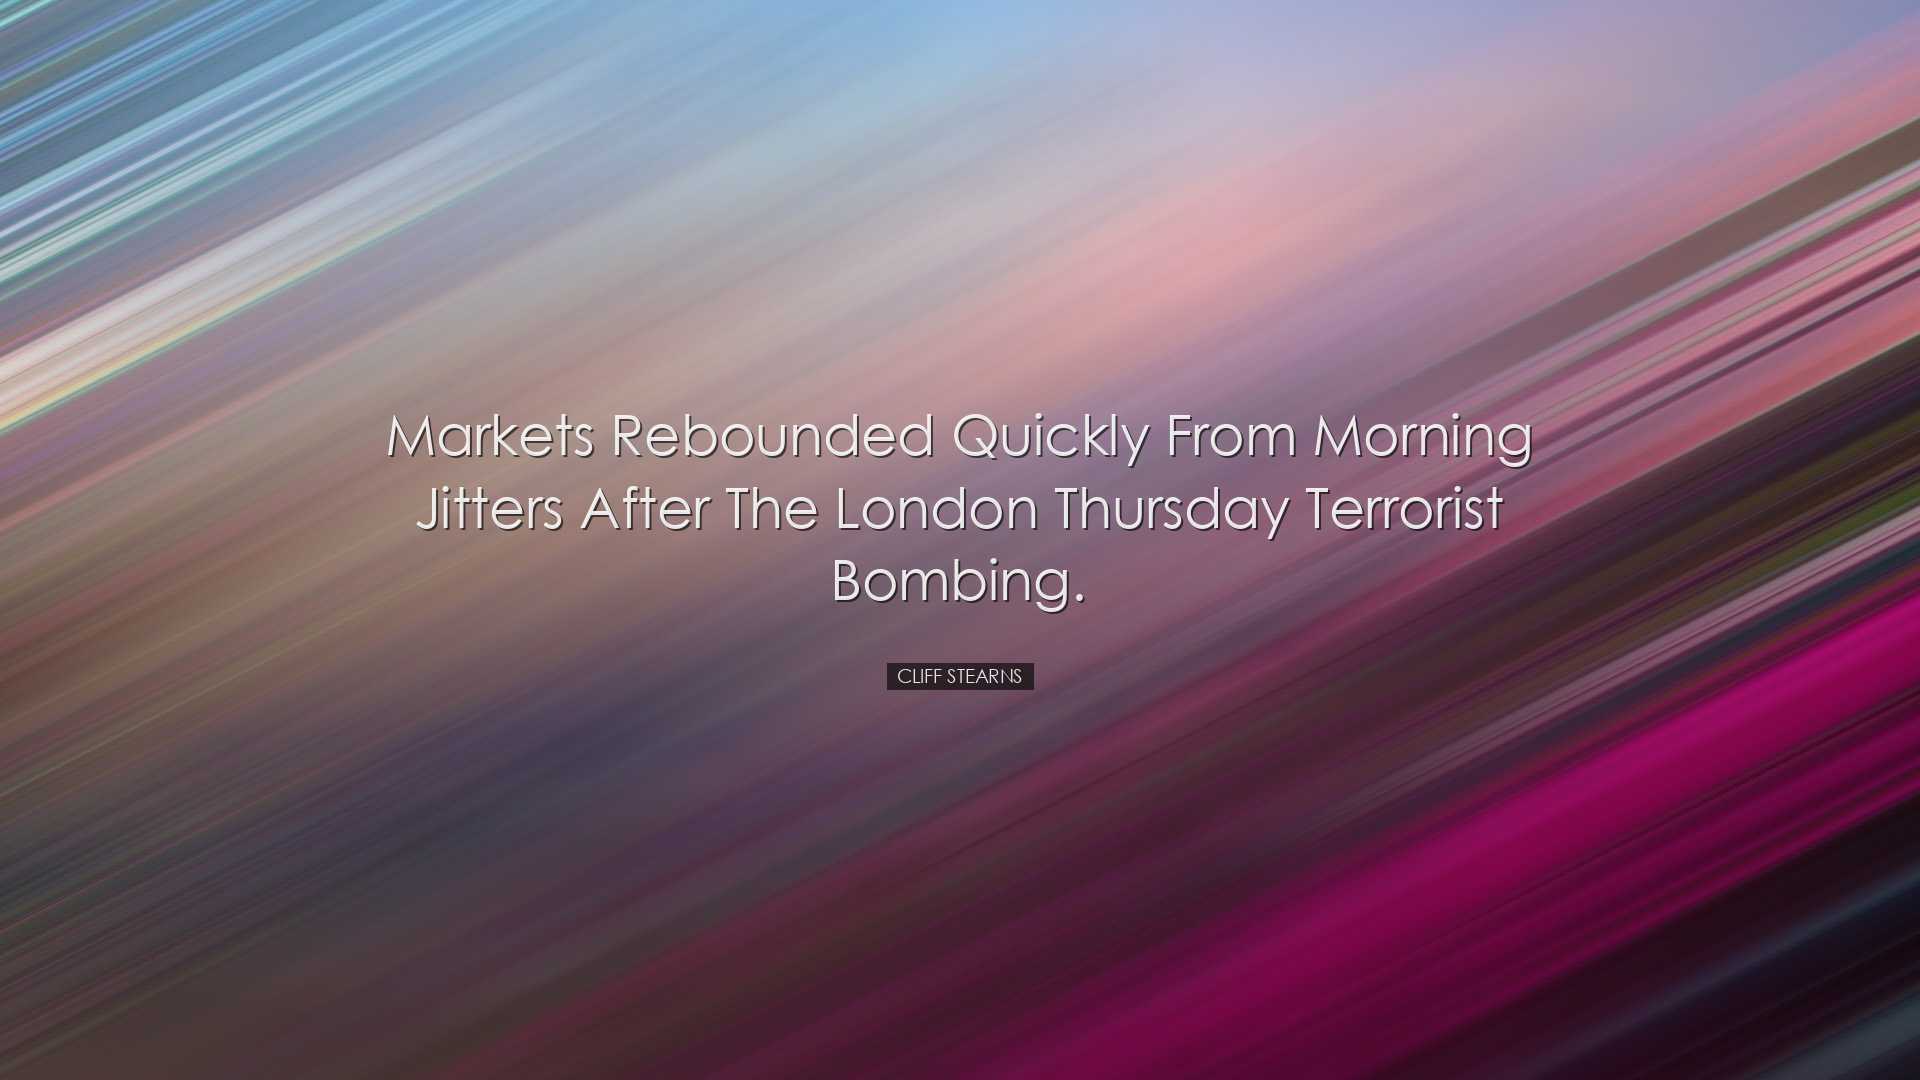 Markets rebounded quickly from morning jitters after the London Th